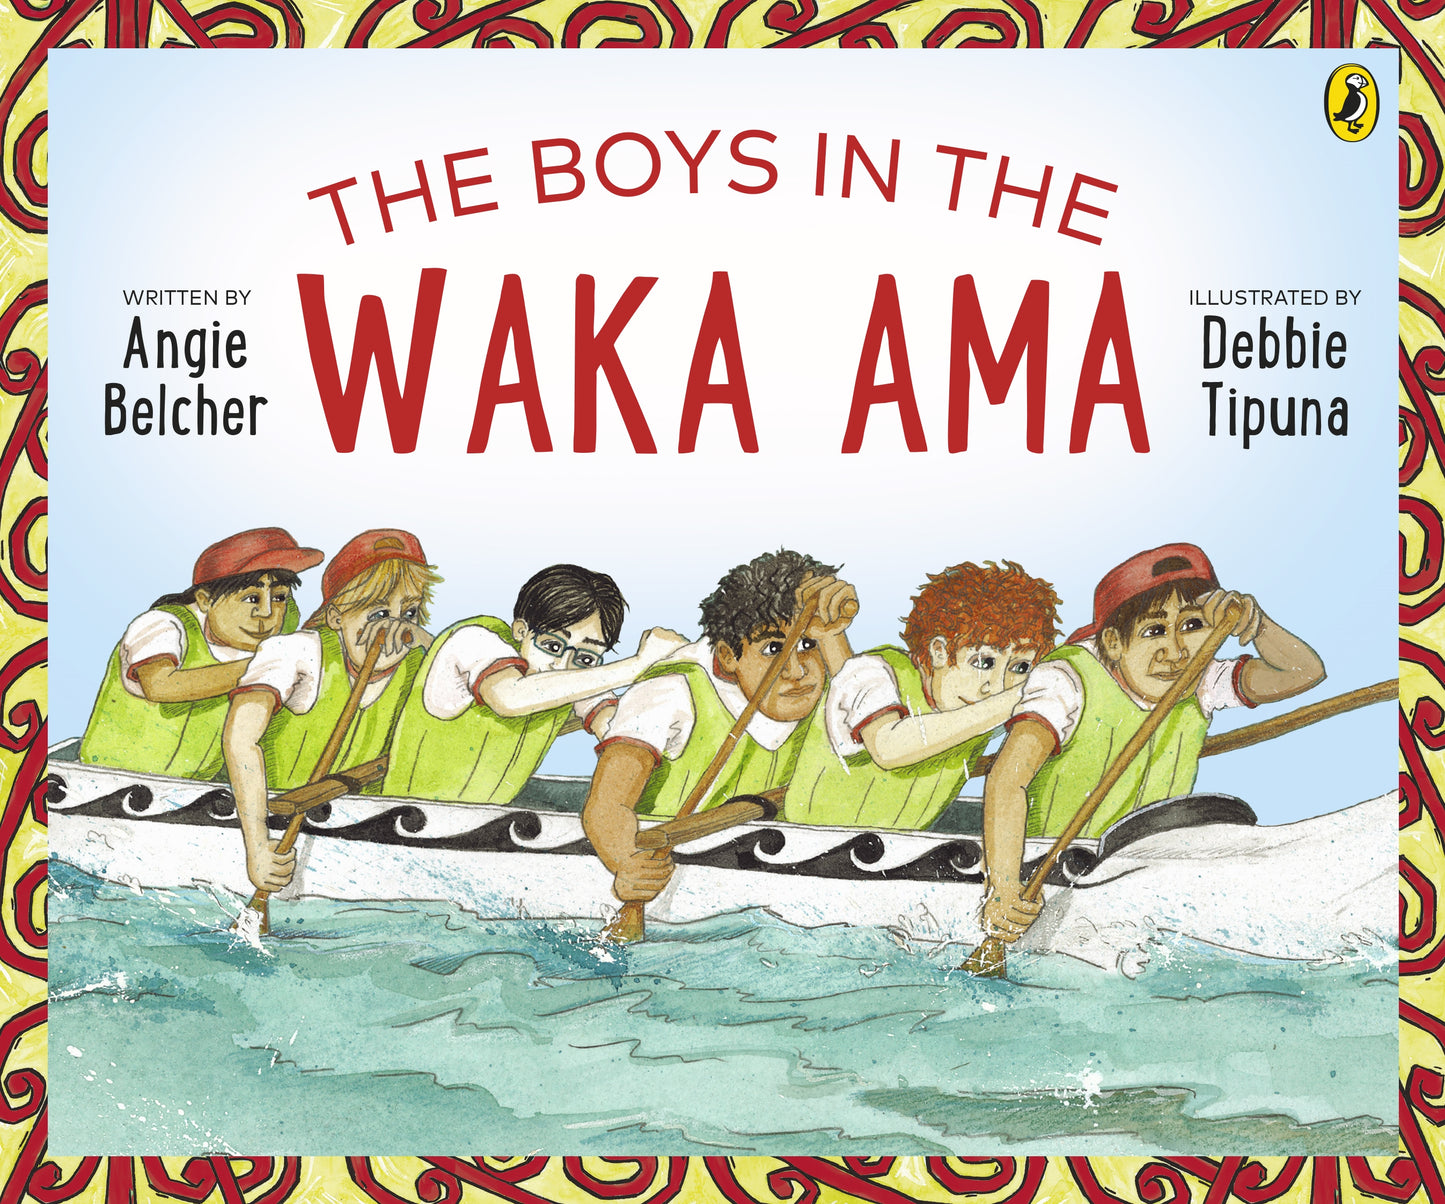 Boys in the Waka Ama by Angie Belcher - City Books & Lotto